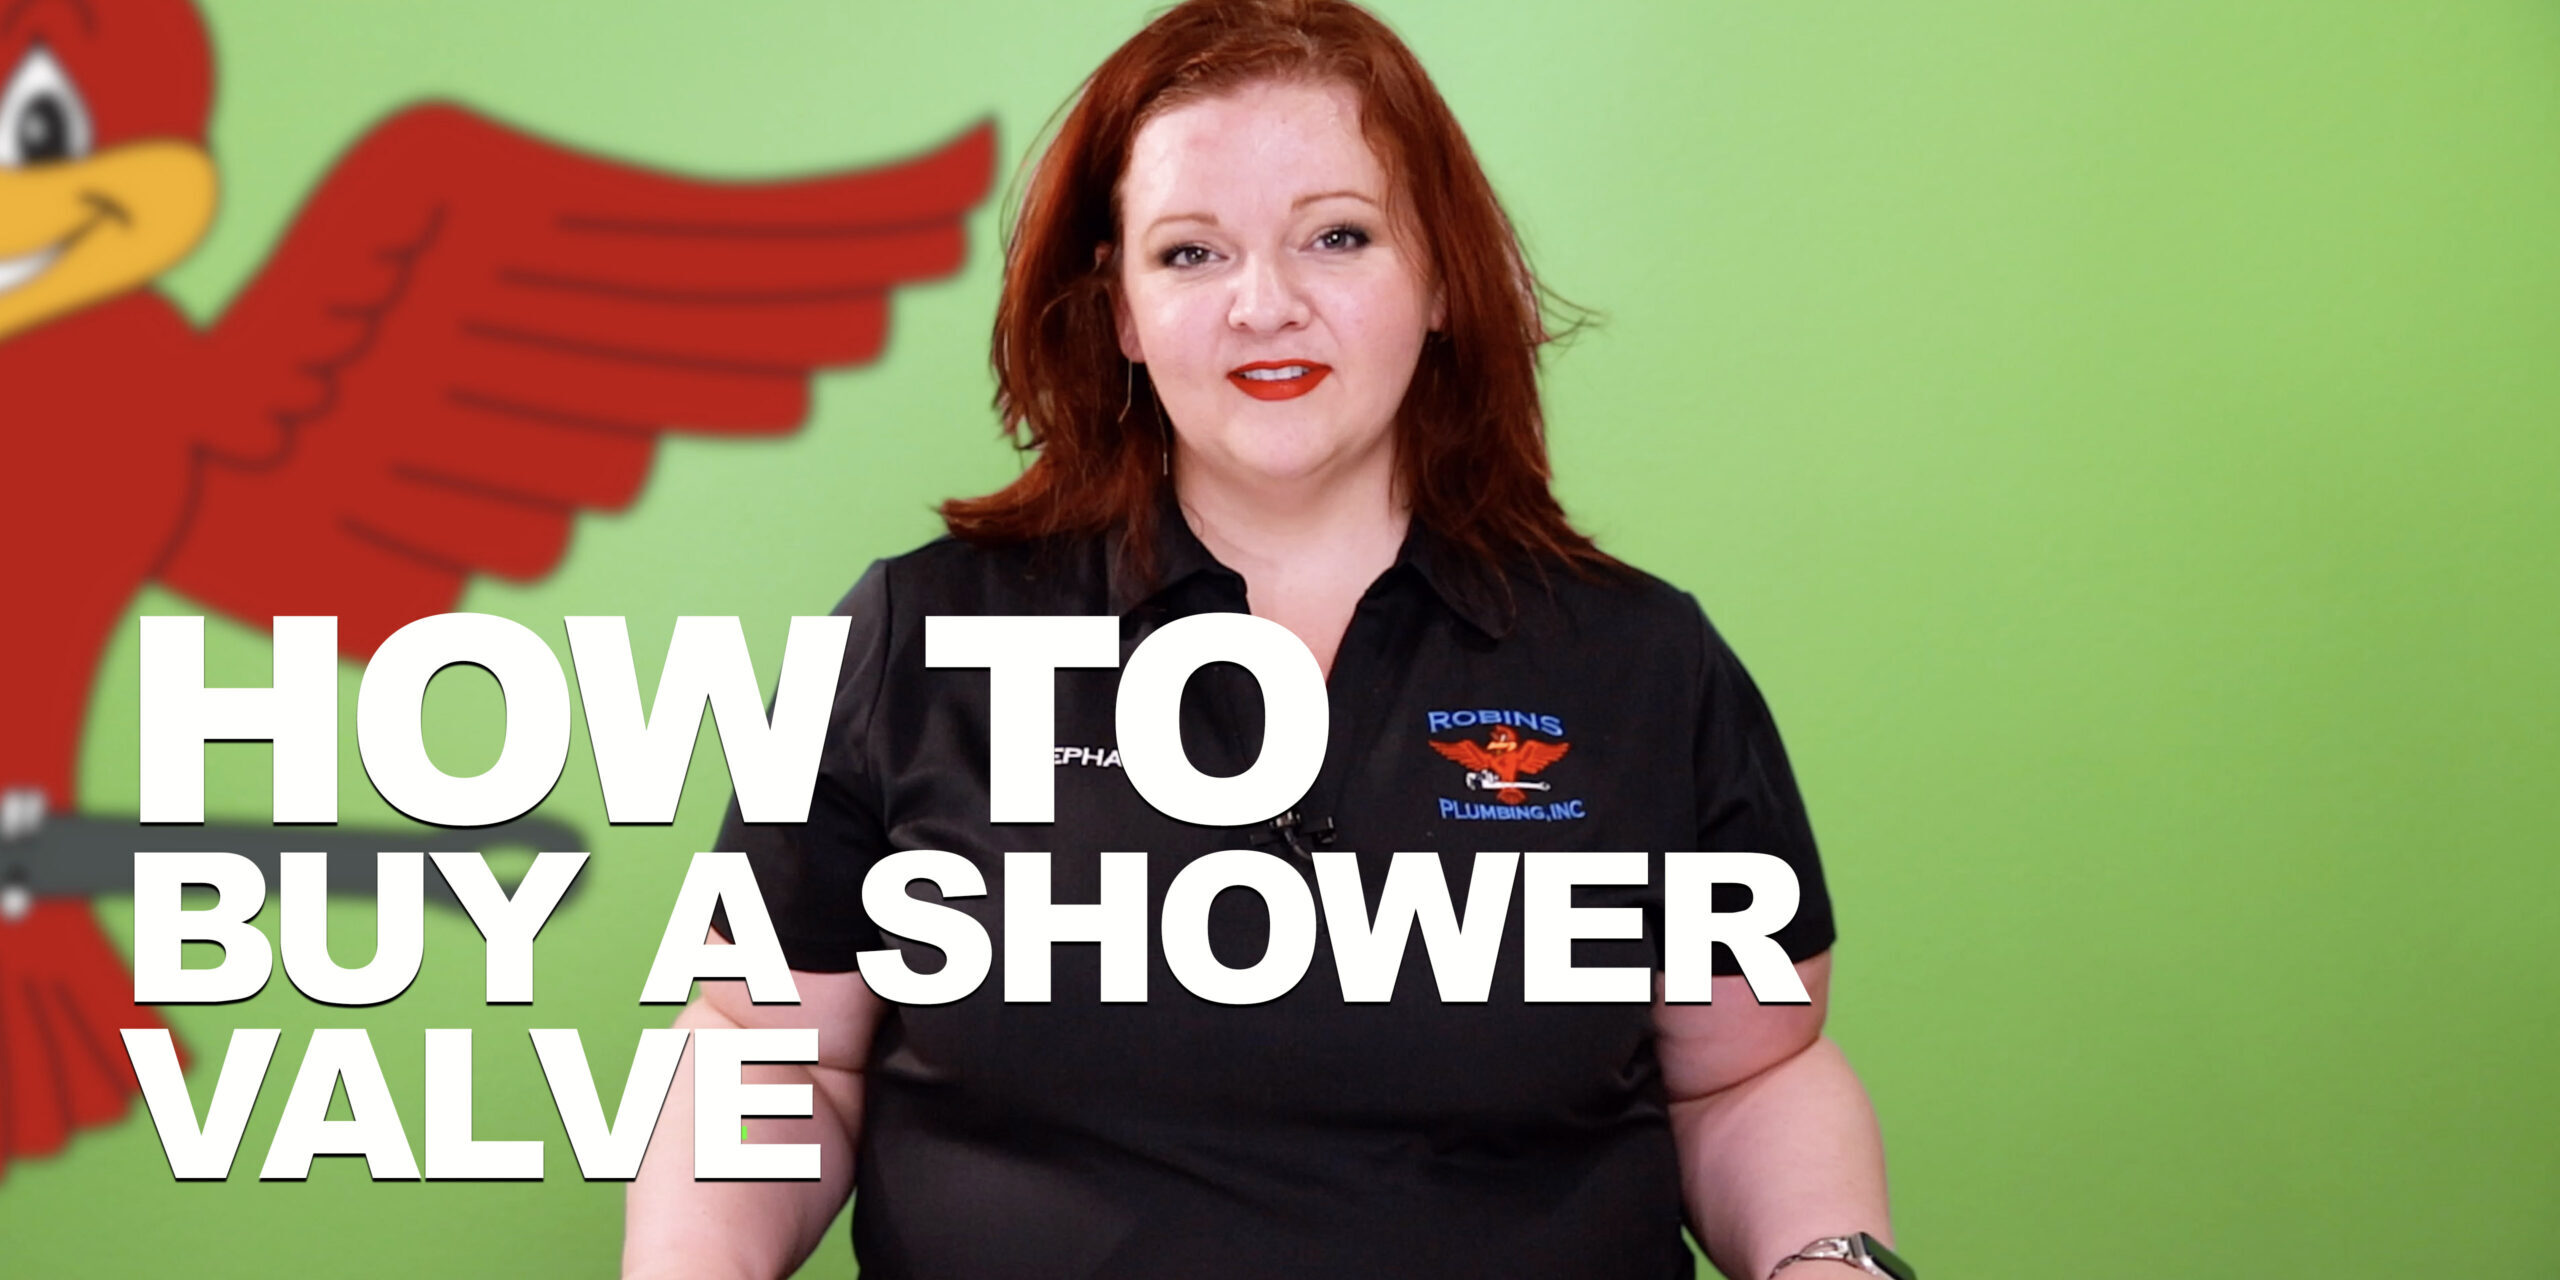 Cover photo for blog and video "How to Buy a Shower Valve"